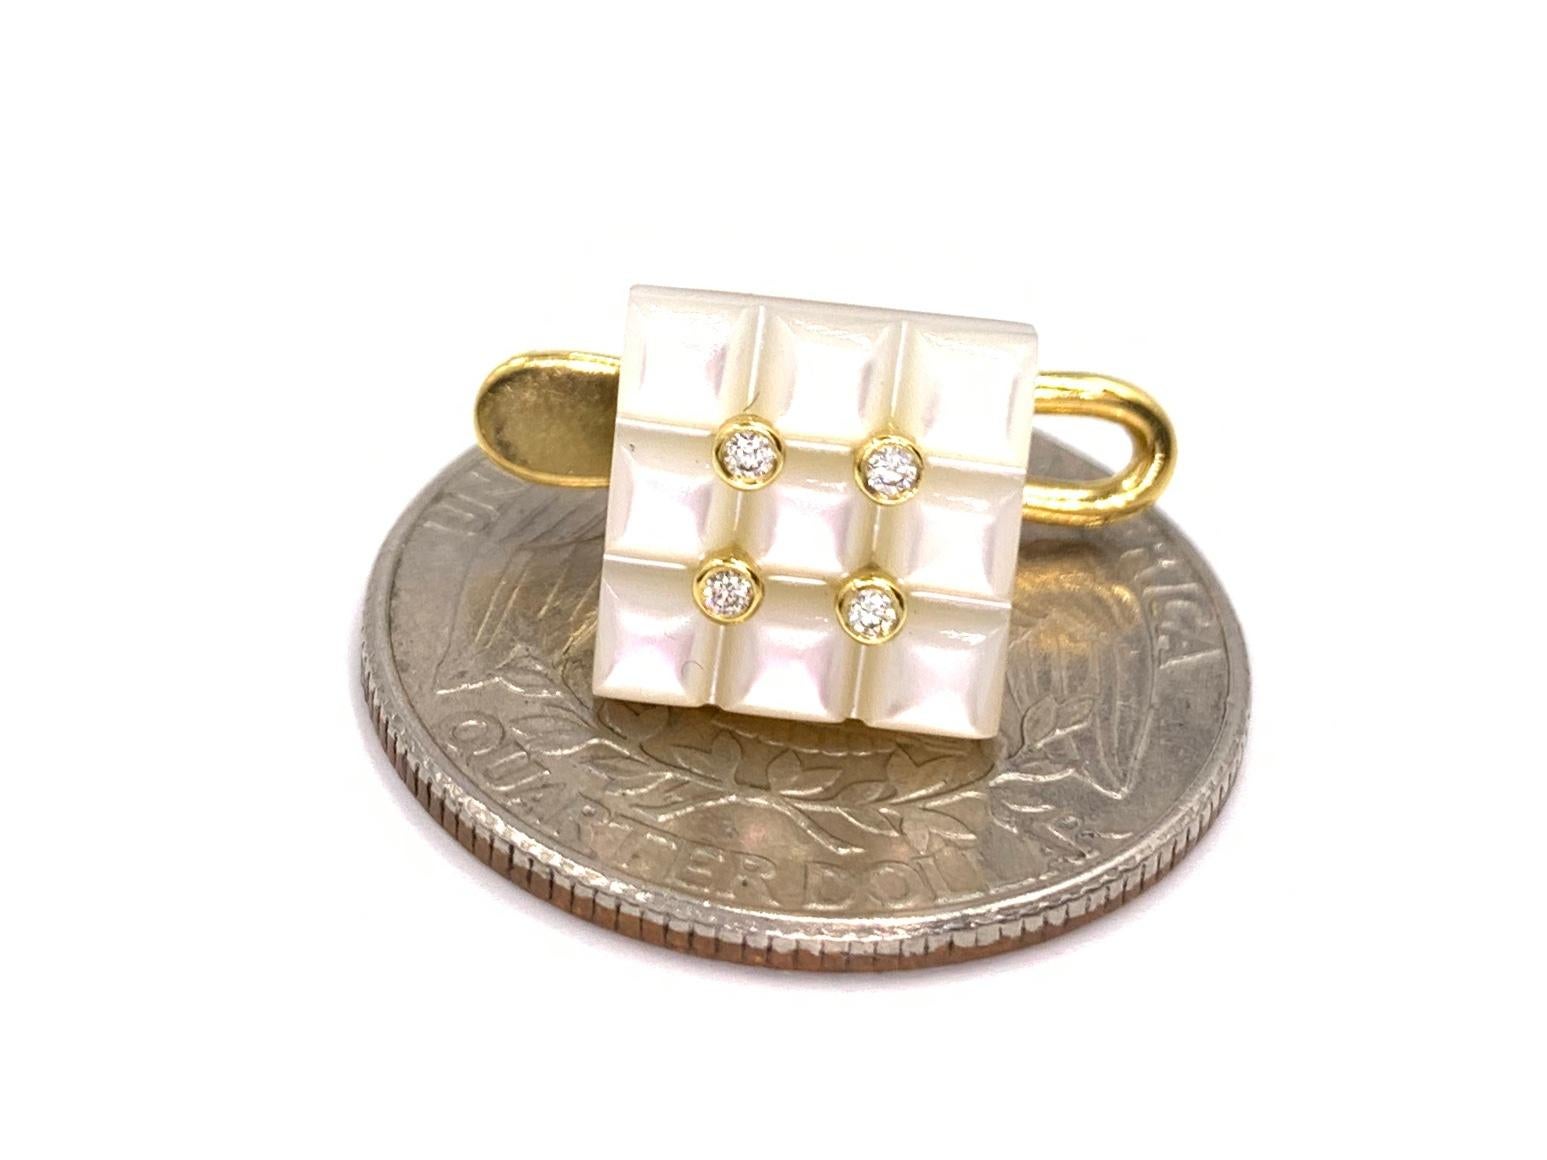 George Gero 18 Karat Mother of Pearl and Diamond Shirt Studs For Sale 4